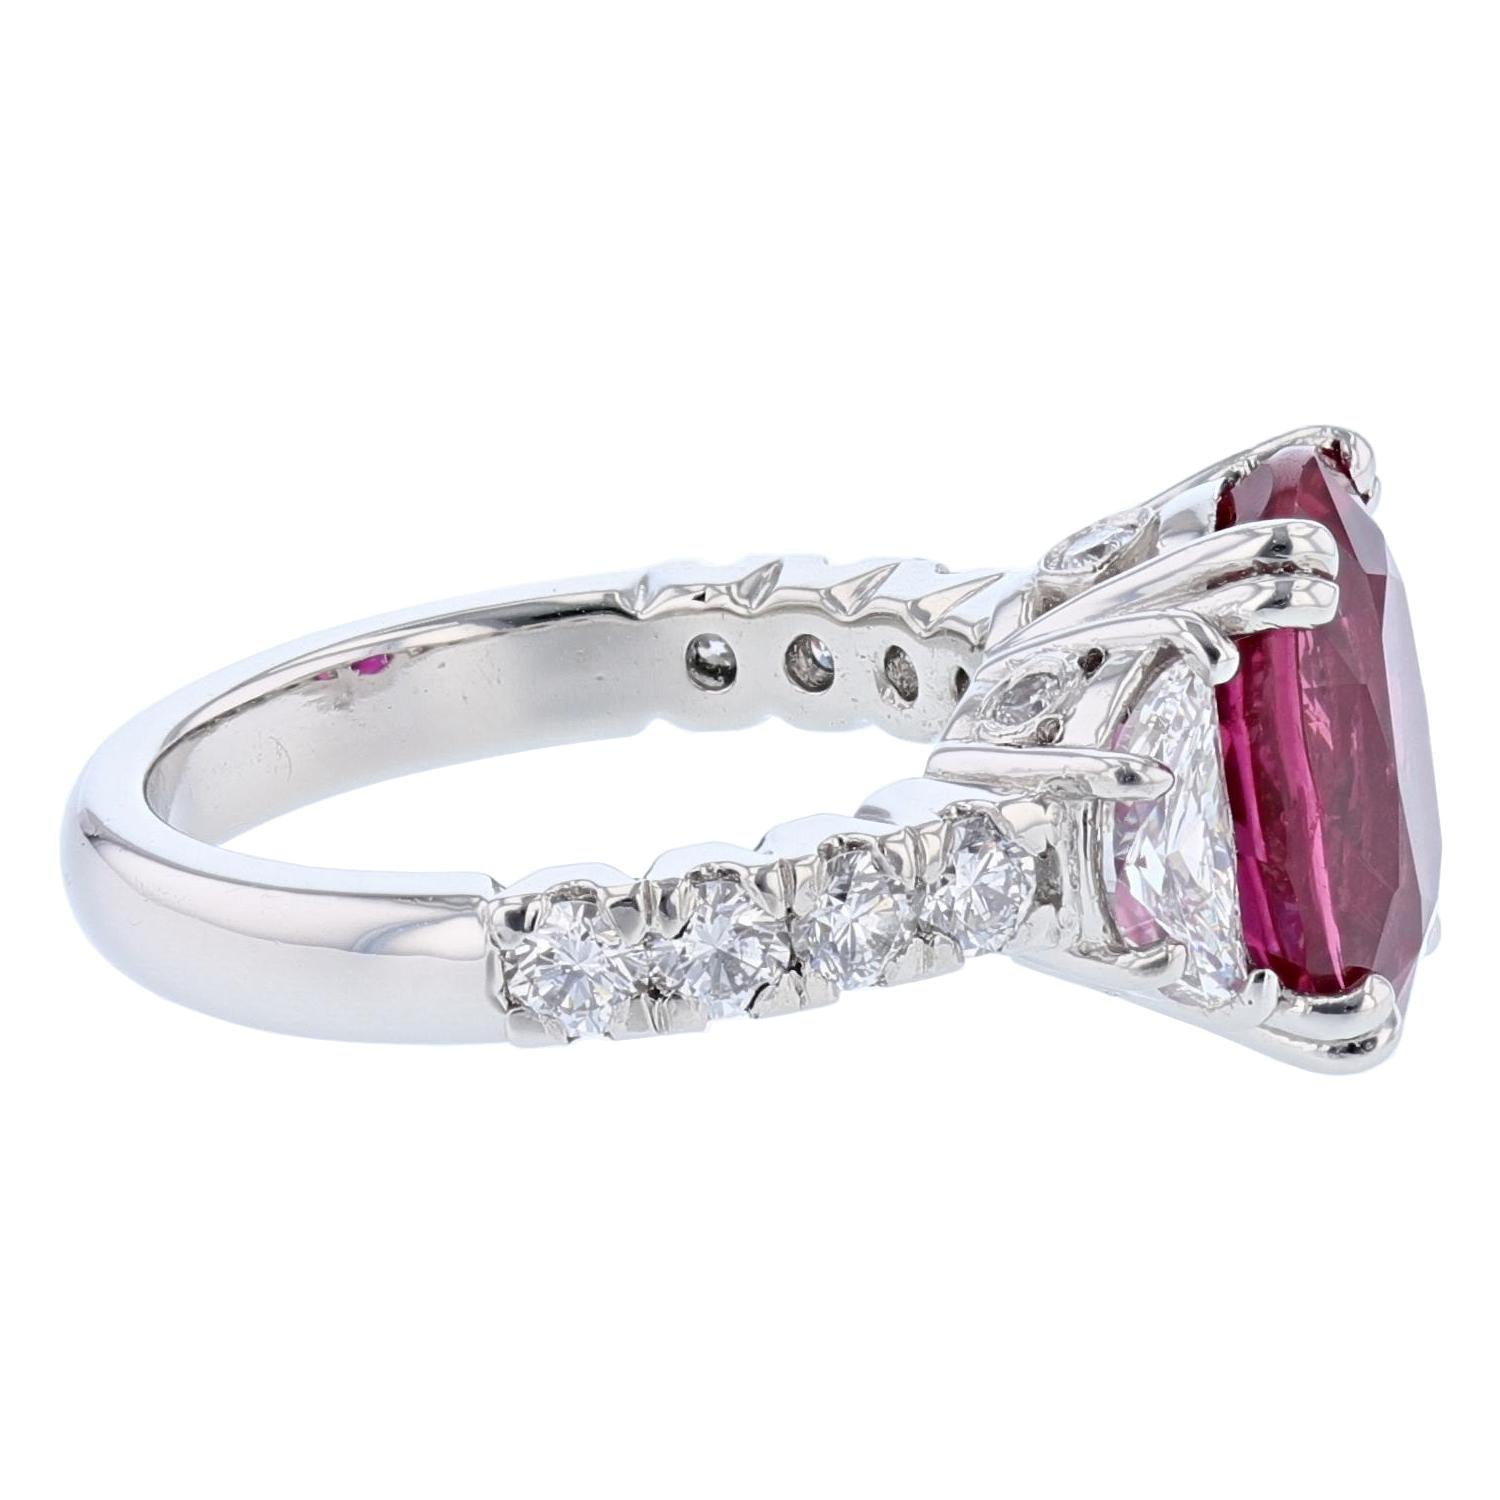 Platinum 5.61 Carat Certified Oval Cut Ruby and Diamond Ring In New Condition For Sale In Houston, TX